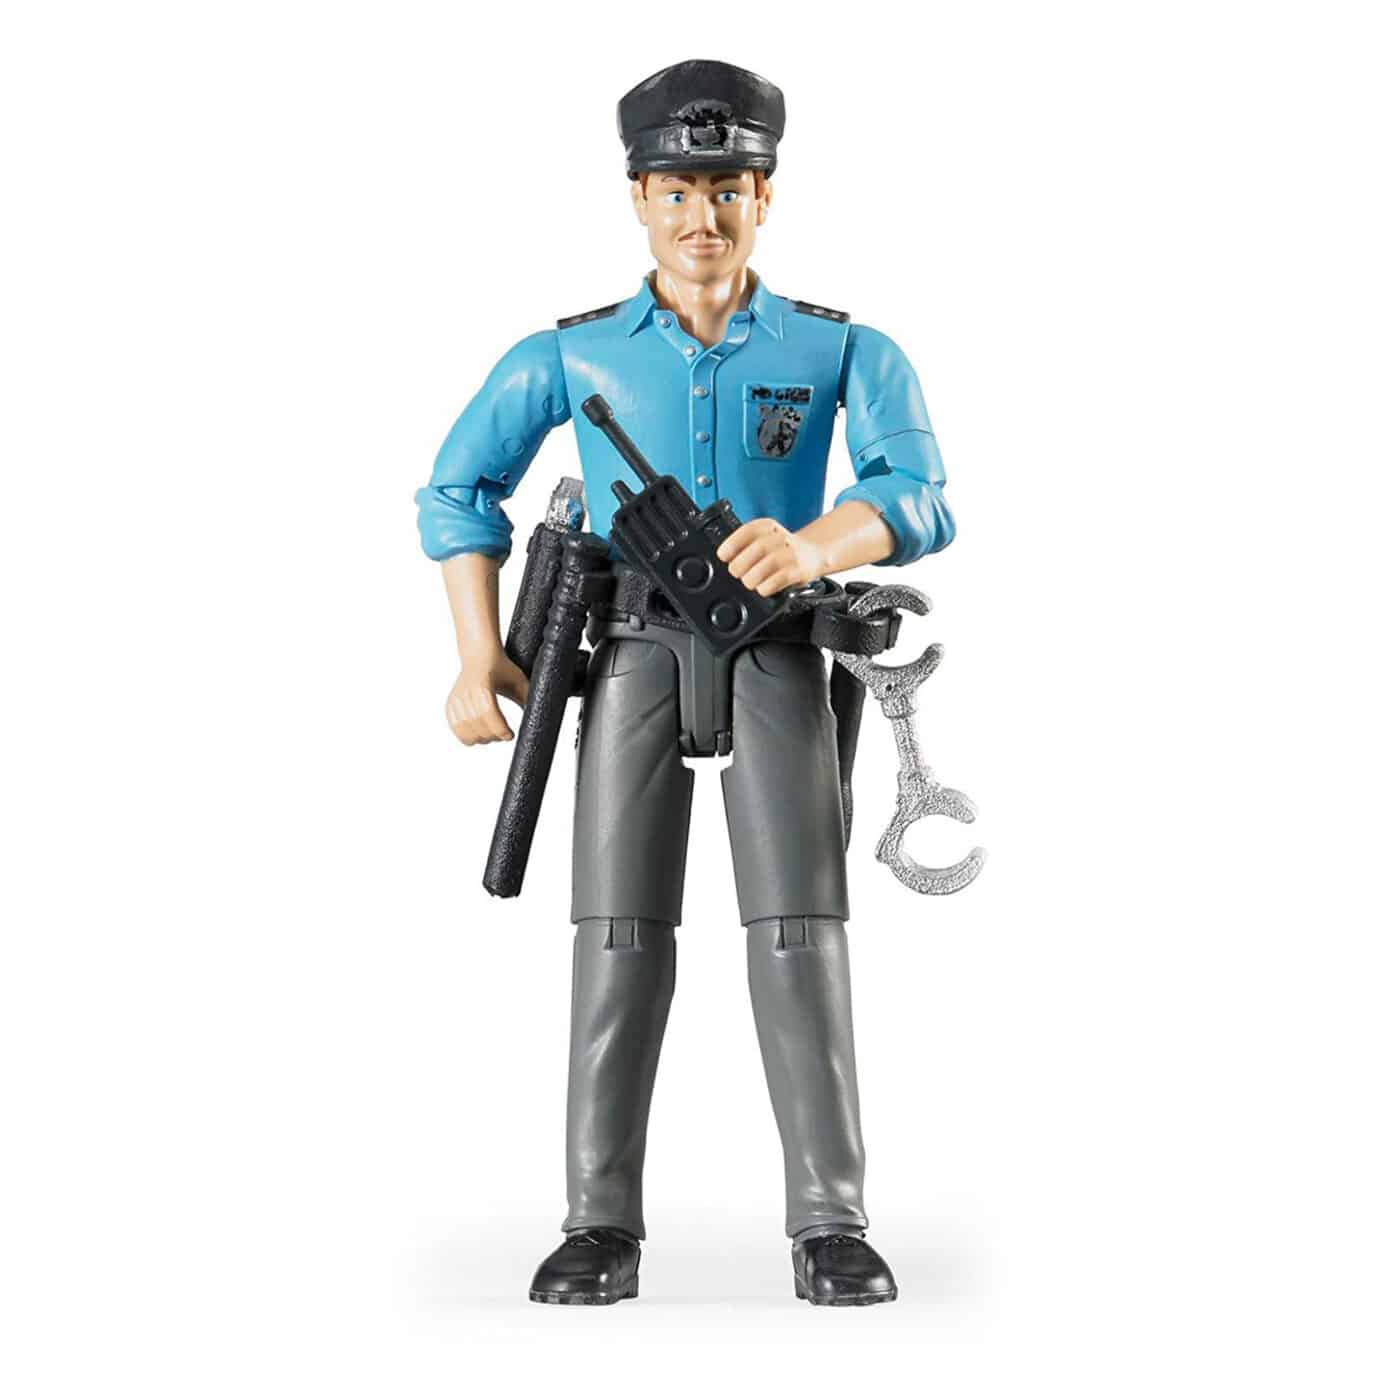 Bworld-Policeman-light-skin-with-accessories